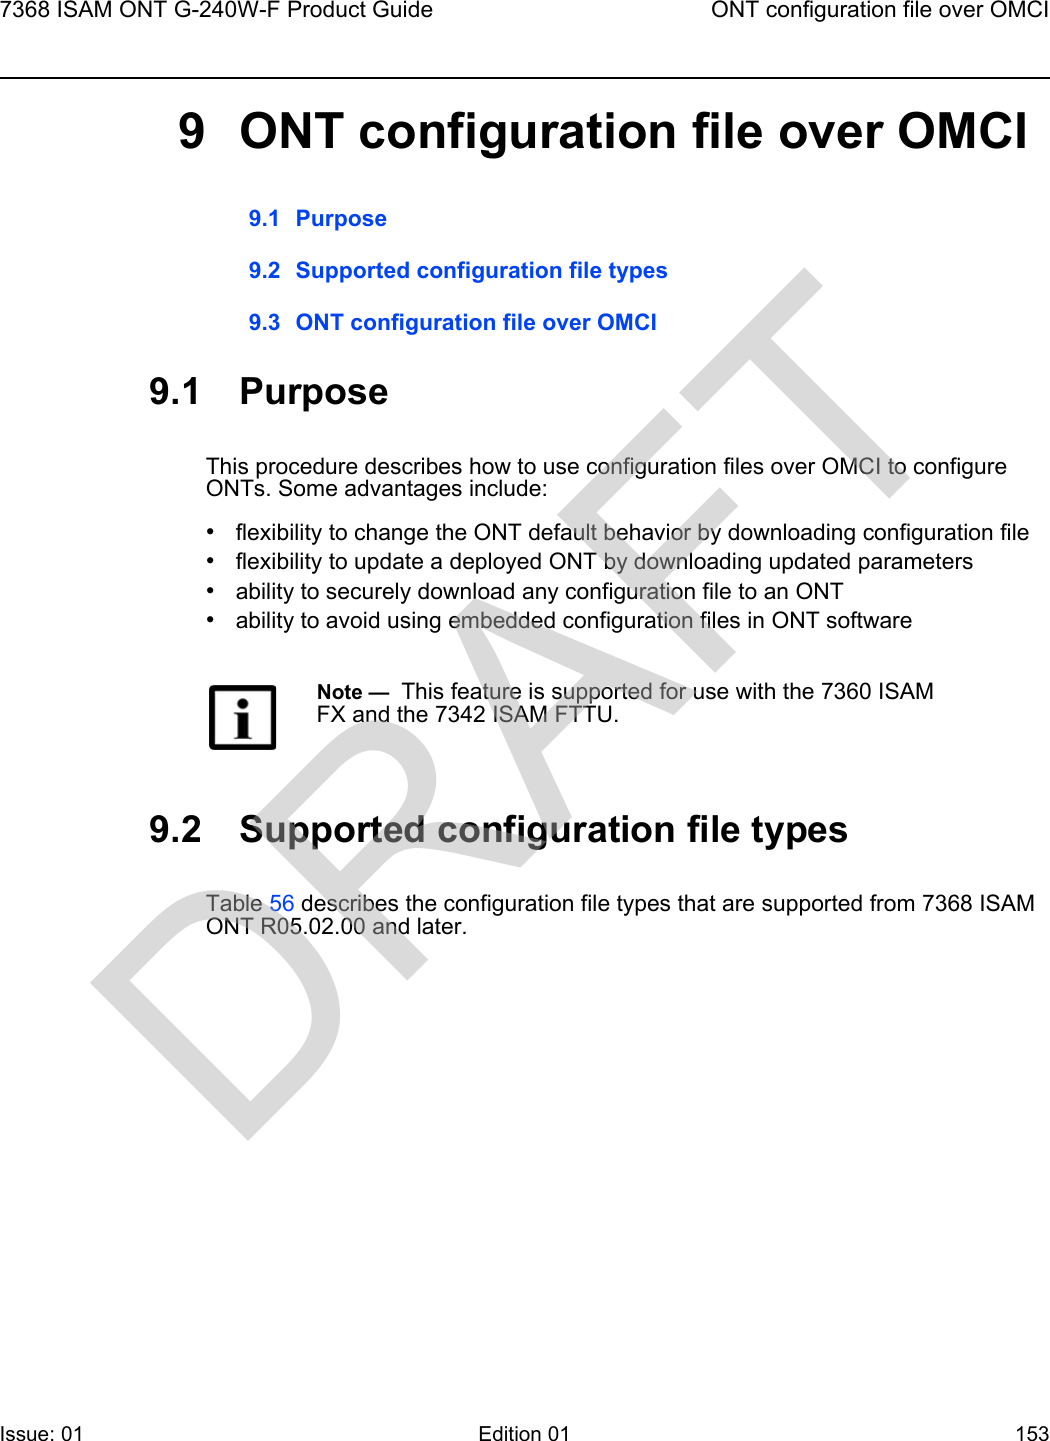 7368 ISAM ONT G-240W-F Product Guide ONT configuration file over OMCIIssue: 01 Edition 01 153 9 ONT configuration file over OMCI9.1 Purpose9.2 Supported configuration file types9.3 ONT configuration file over OMCI9.1 PurposeThis procedure describes how to use configuration files over OMCI to configure ONTs. Some advantages include:•flexibility to change the ONT default behavior by downloading configuration file•flexibility to update a deployed ONT by downloading updated parameters•ability to securely download any configuration file to an ONT•ability to avoid using embedded configuration files in ONT software9.2 Supported configuration file typesTable 56 describes the configuration file types that are supported from 7368 ISAM ONT R05.02.00 and later. Note —  This feature is supported for use with the 7360 ISAM FX and the 7342 ISAM FTTU.DRAFT